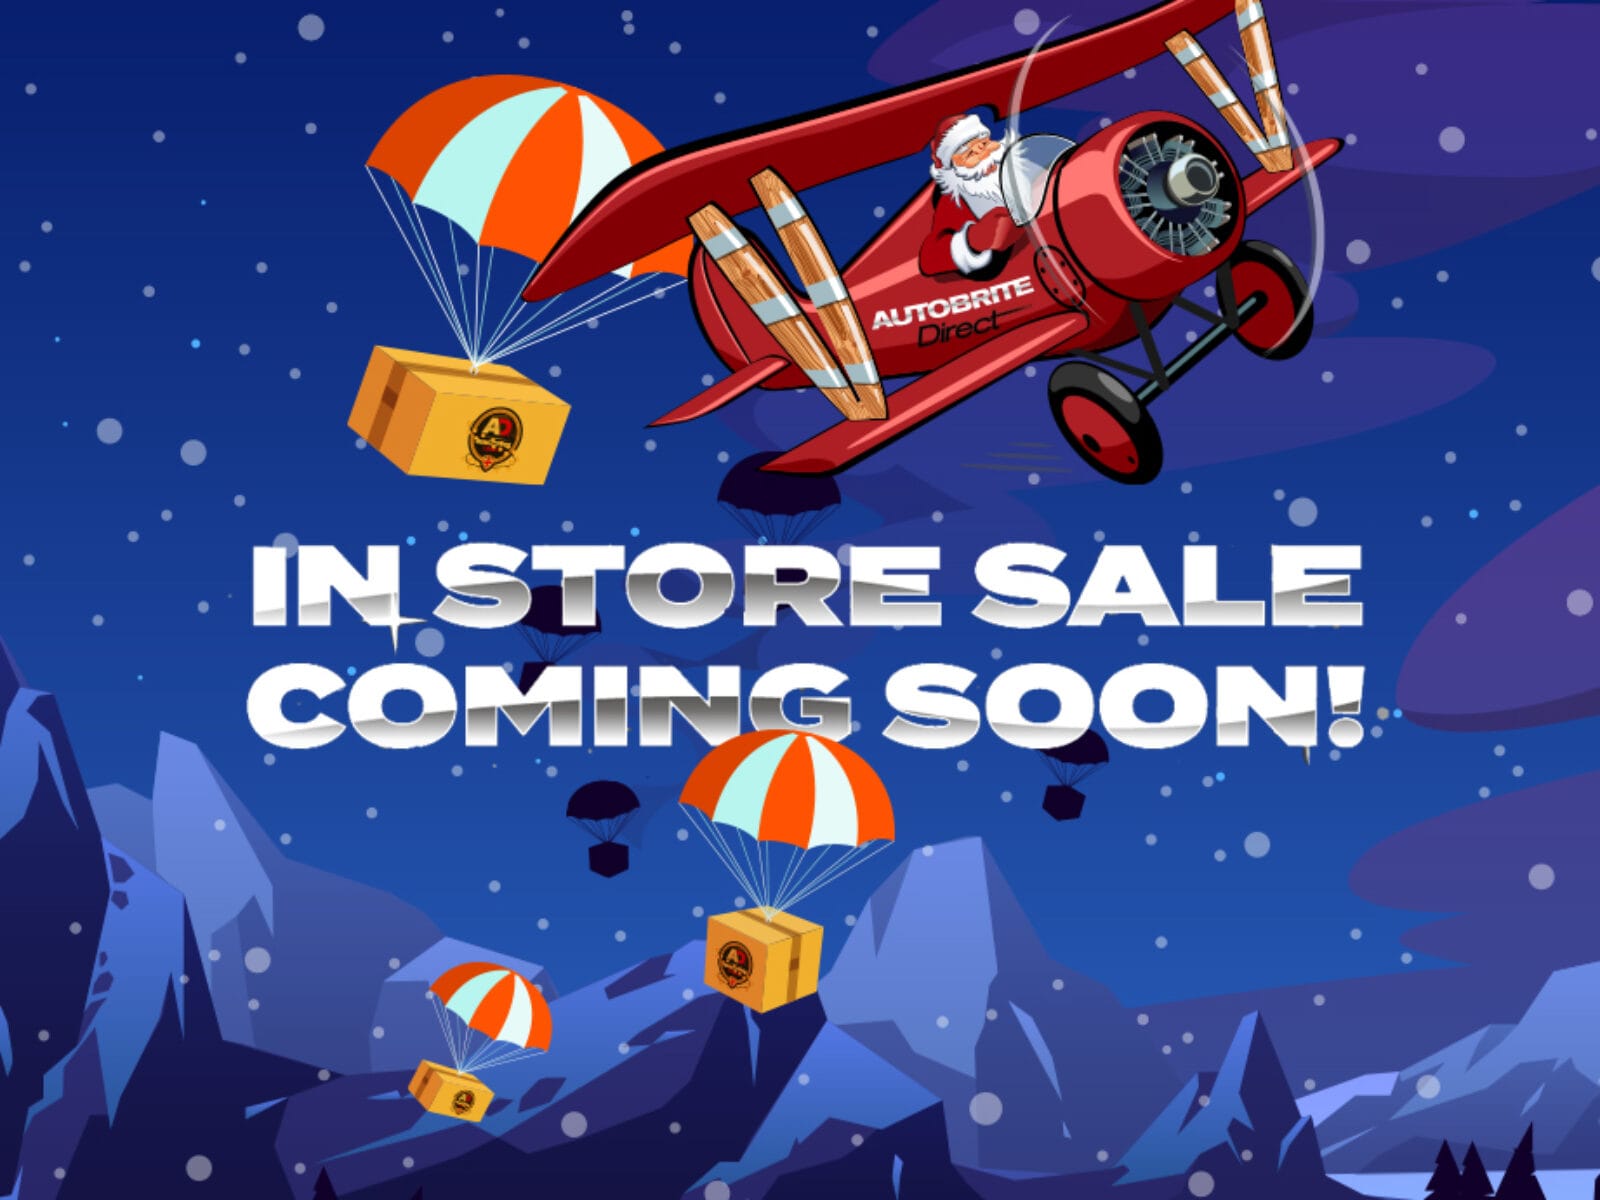 In-store Autobrite Sale Coming Soon